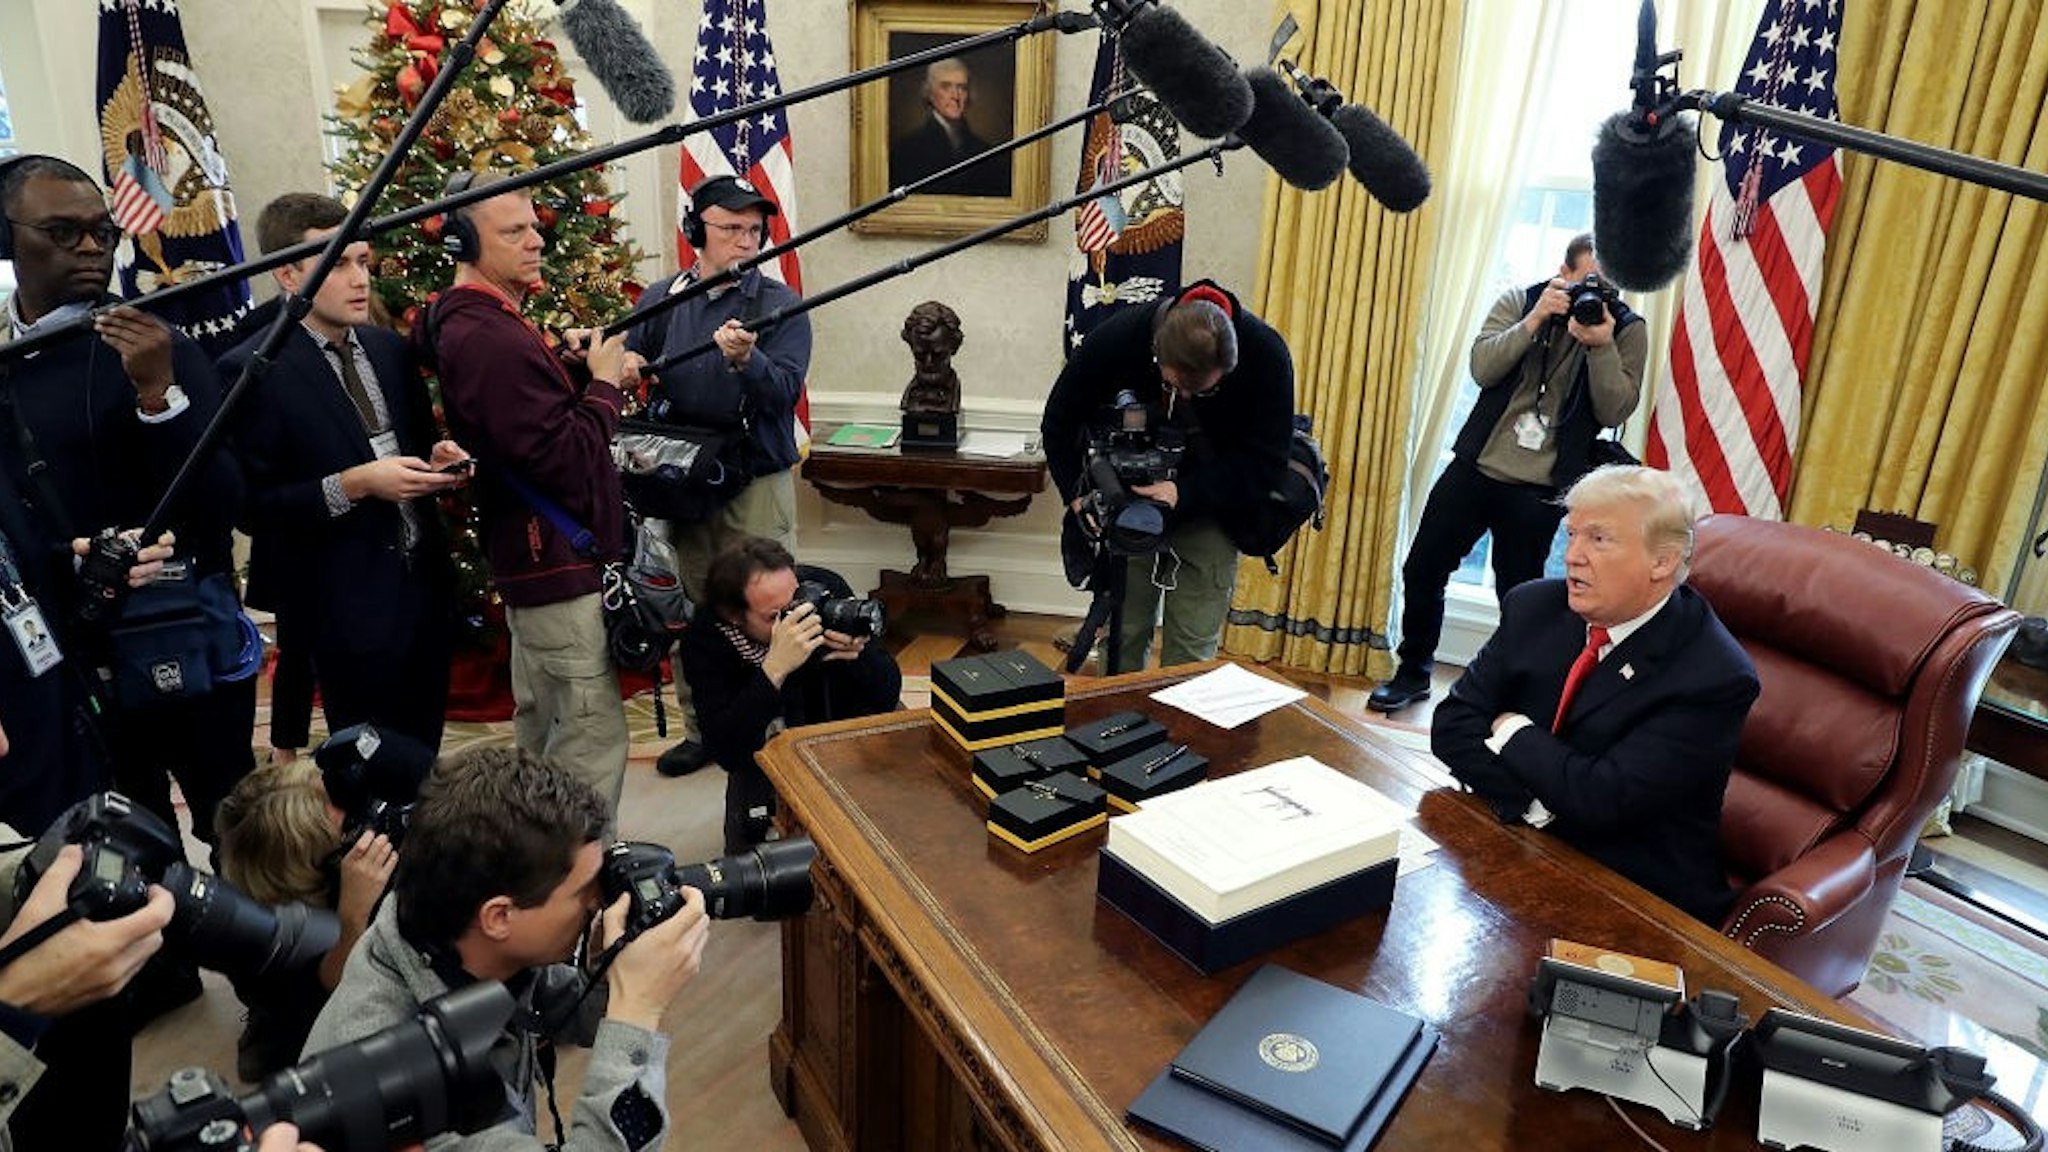 WASHINGTON, DC - DECEMBER 22: U.S. President Donald Trump talks with journalists after signing tax reform legislation in the Oval Office December 22, 2017 in Washington, DC. Trump praised Republican leaders in Congress for all their work on the biggest tax overhaul in decades. (Photo by